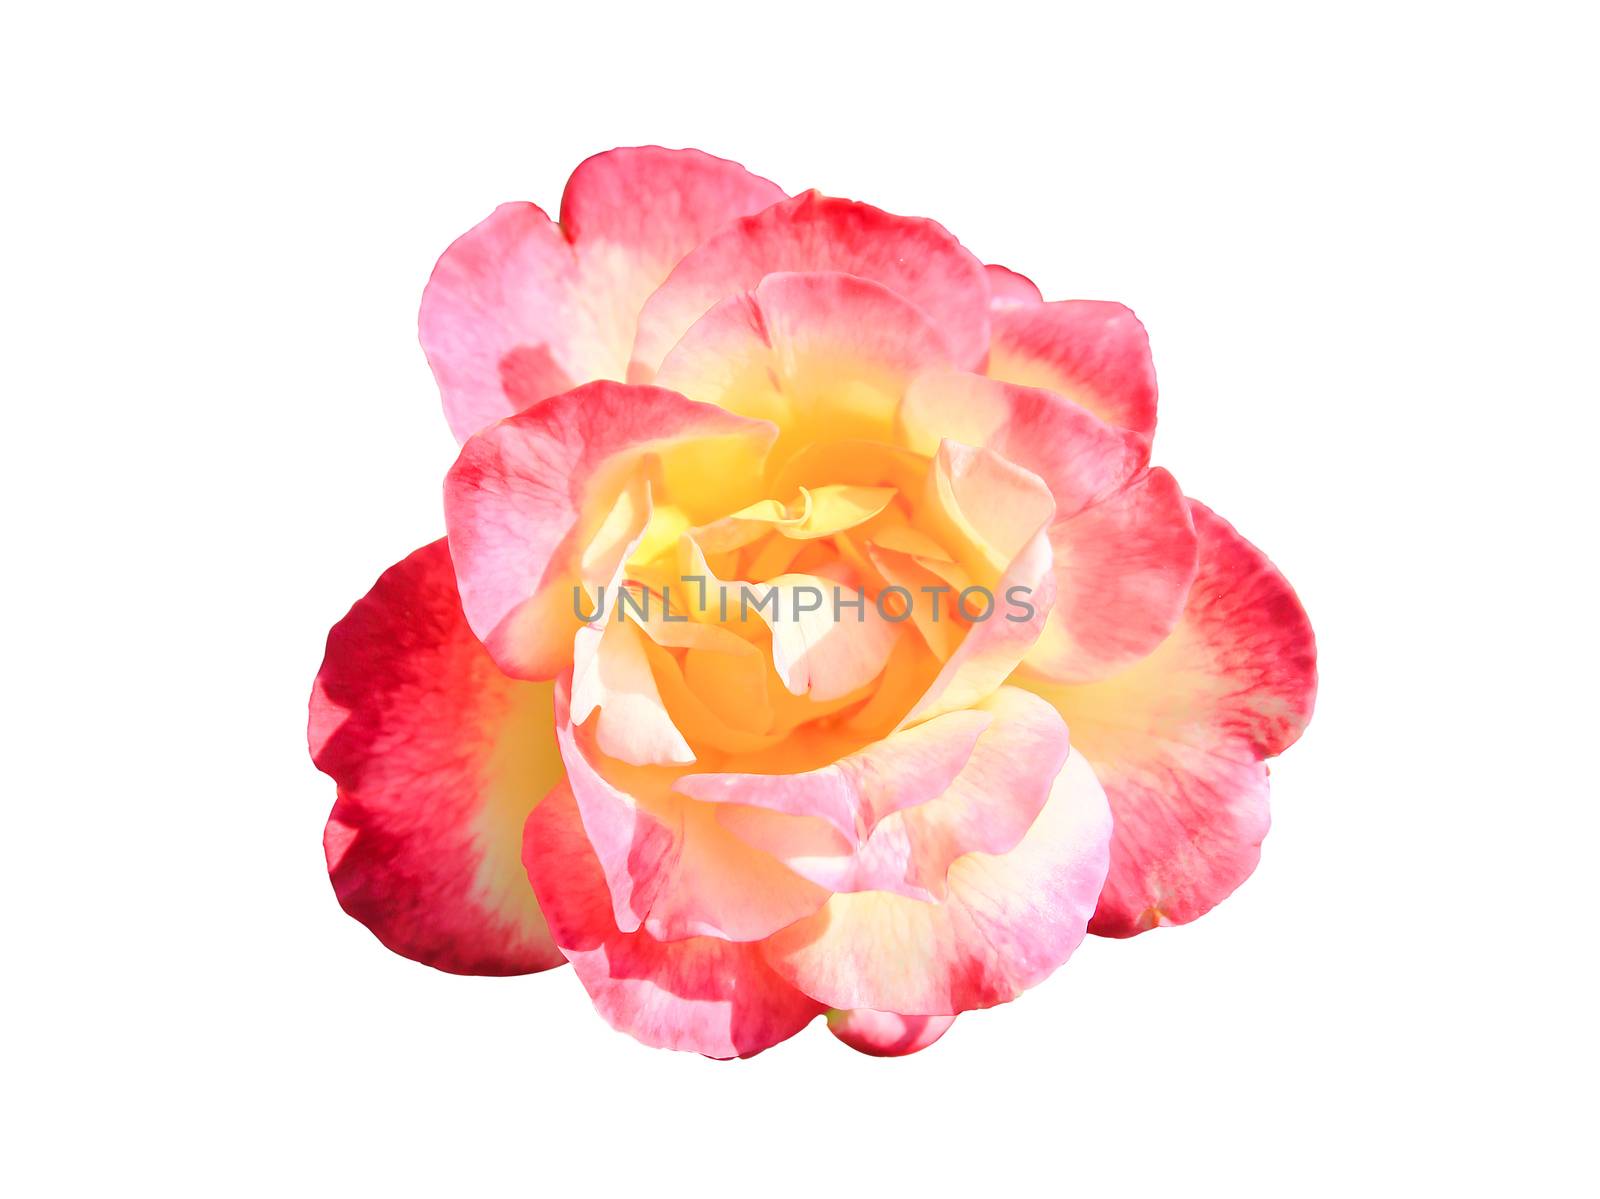 A beautiful pink rose against a white background. Pink roses are a great sign of romance and love